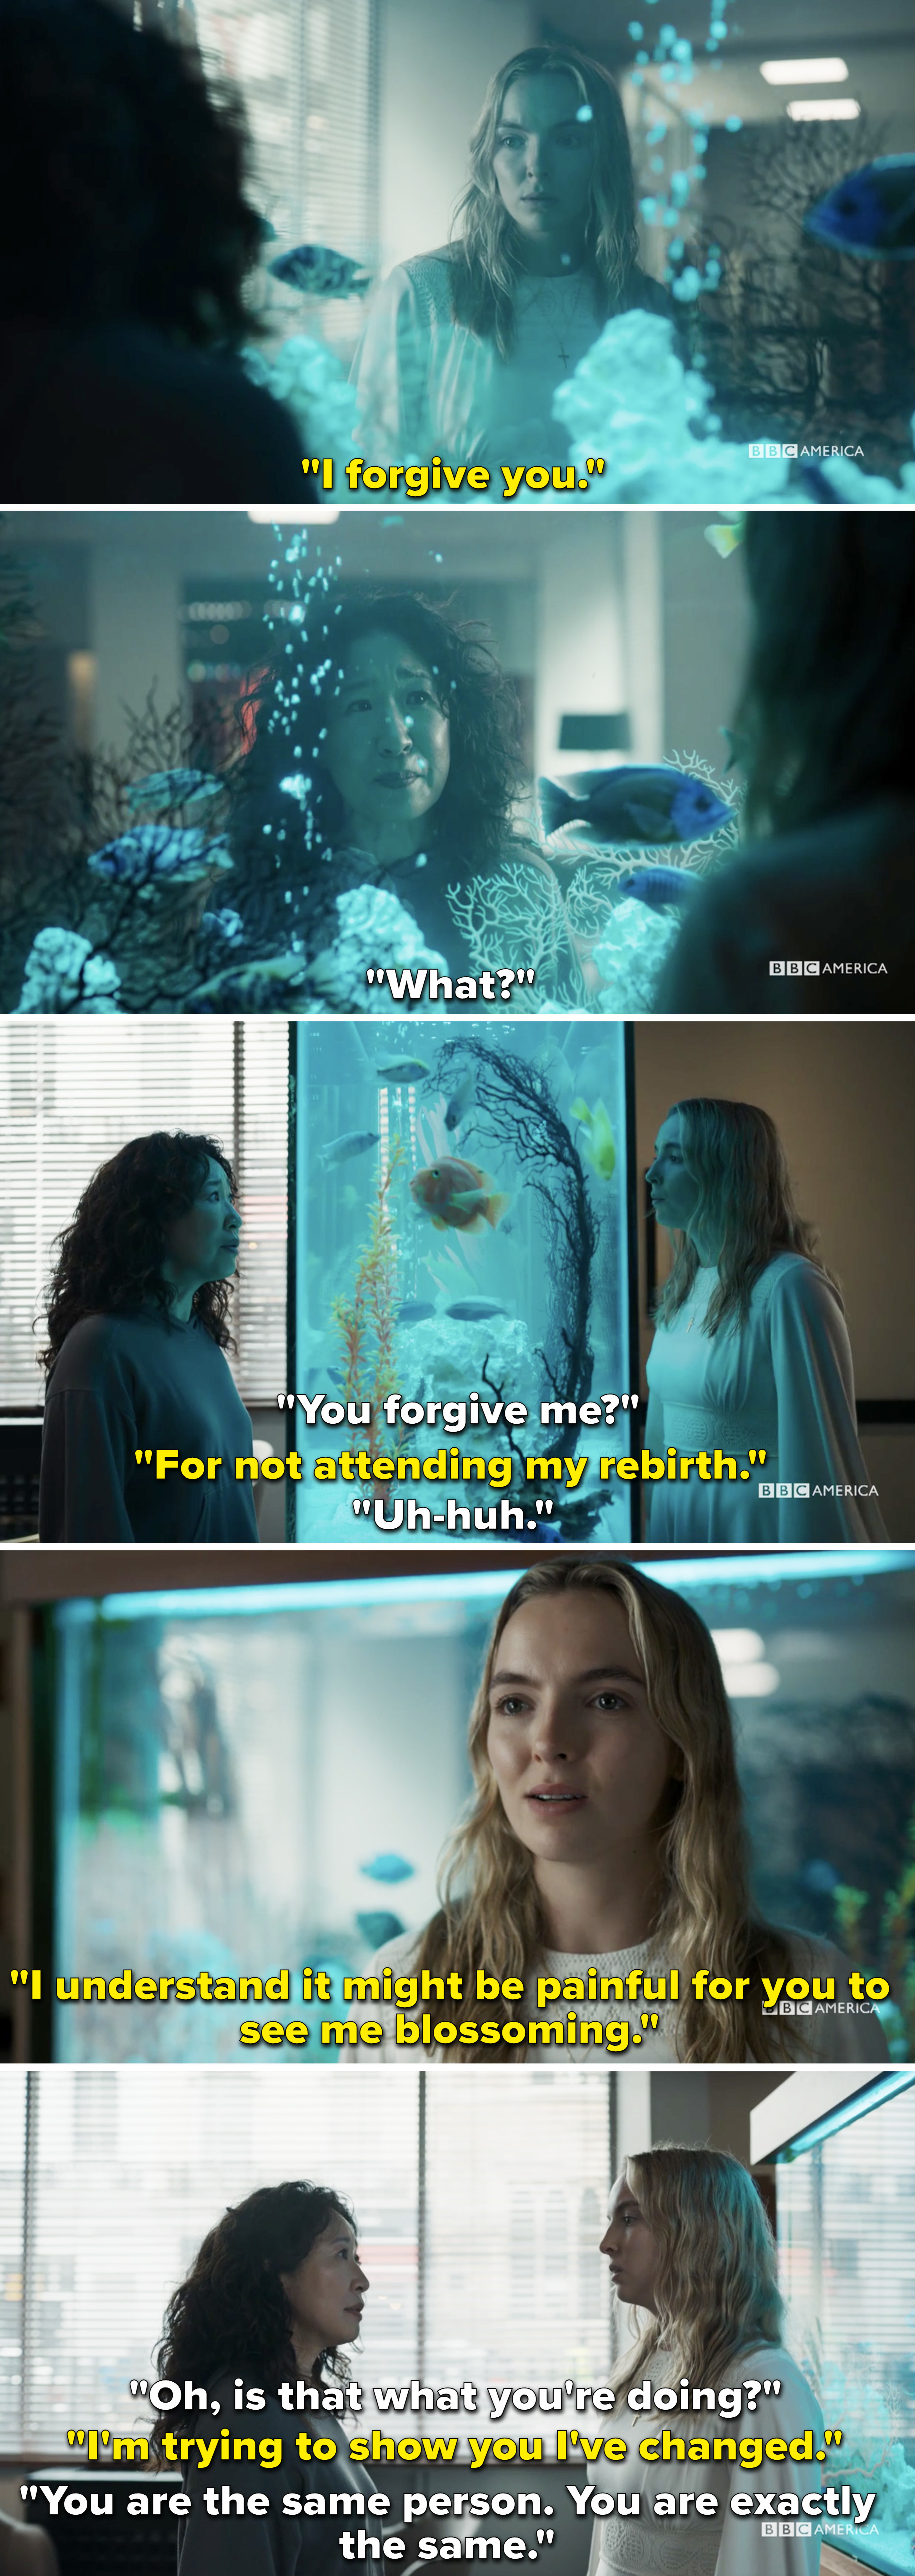 Villanelle and Eve talking by a fish tank and Villanelle saying she forgives Eve for missing her &quot;rebirth&quot;